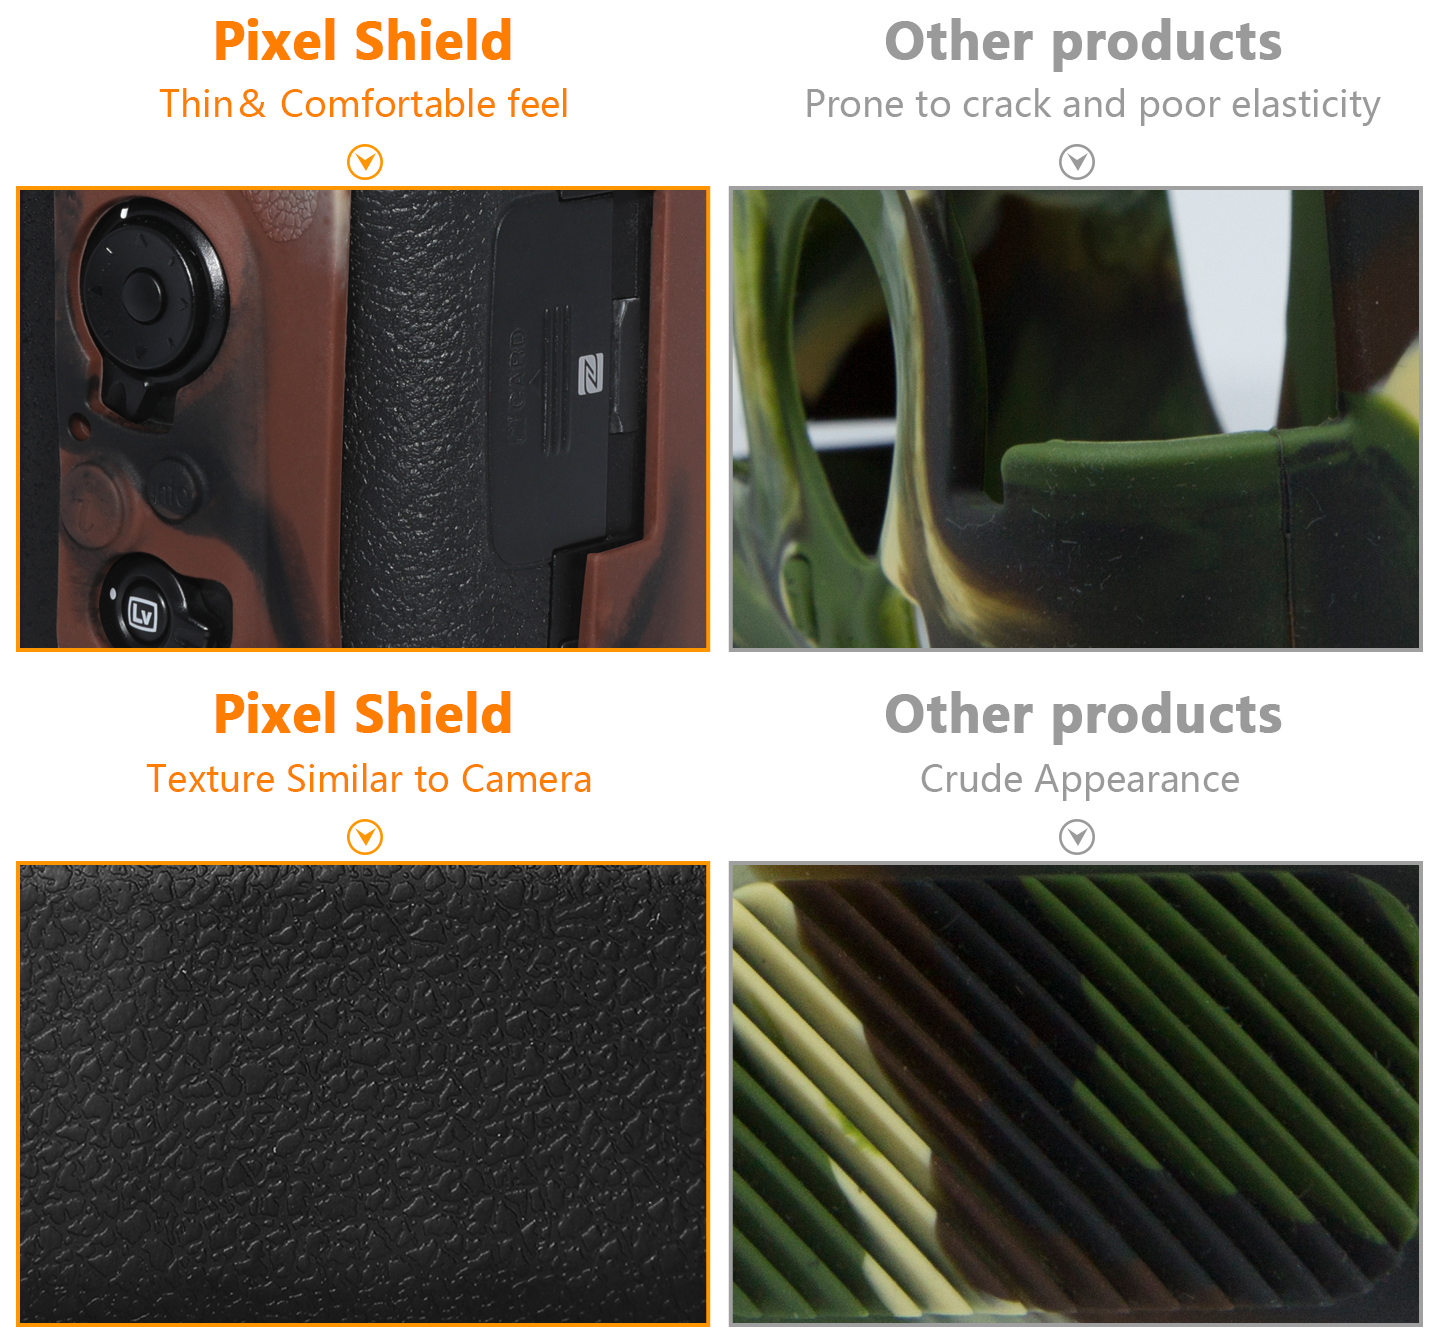 Pixel Shield VS Other products